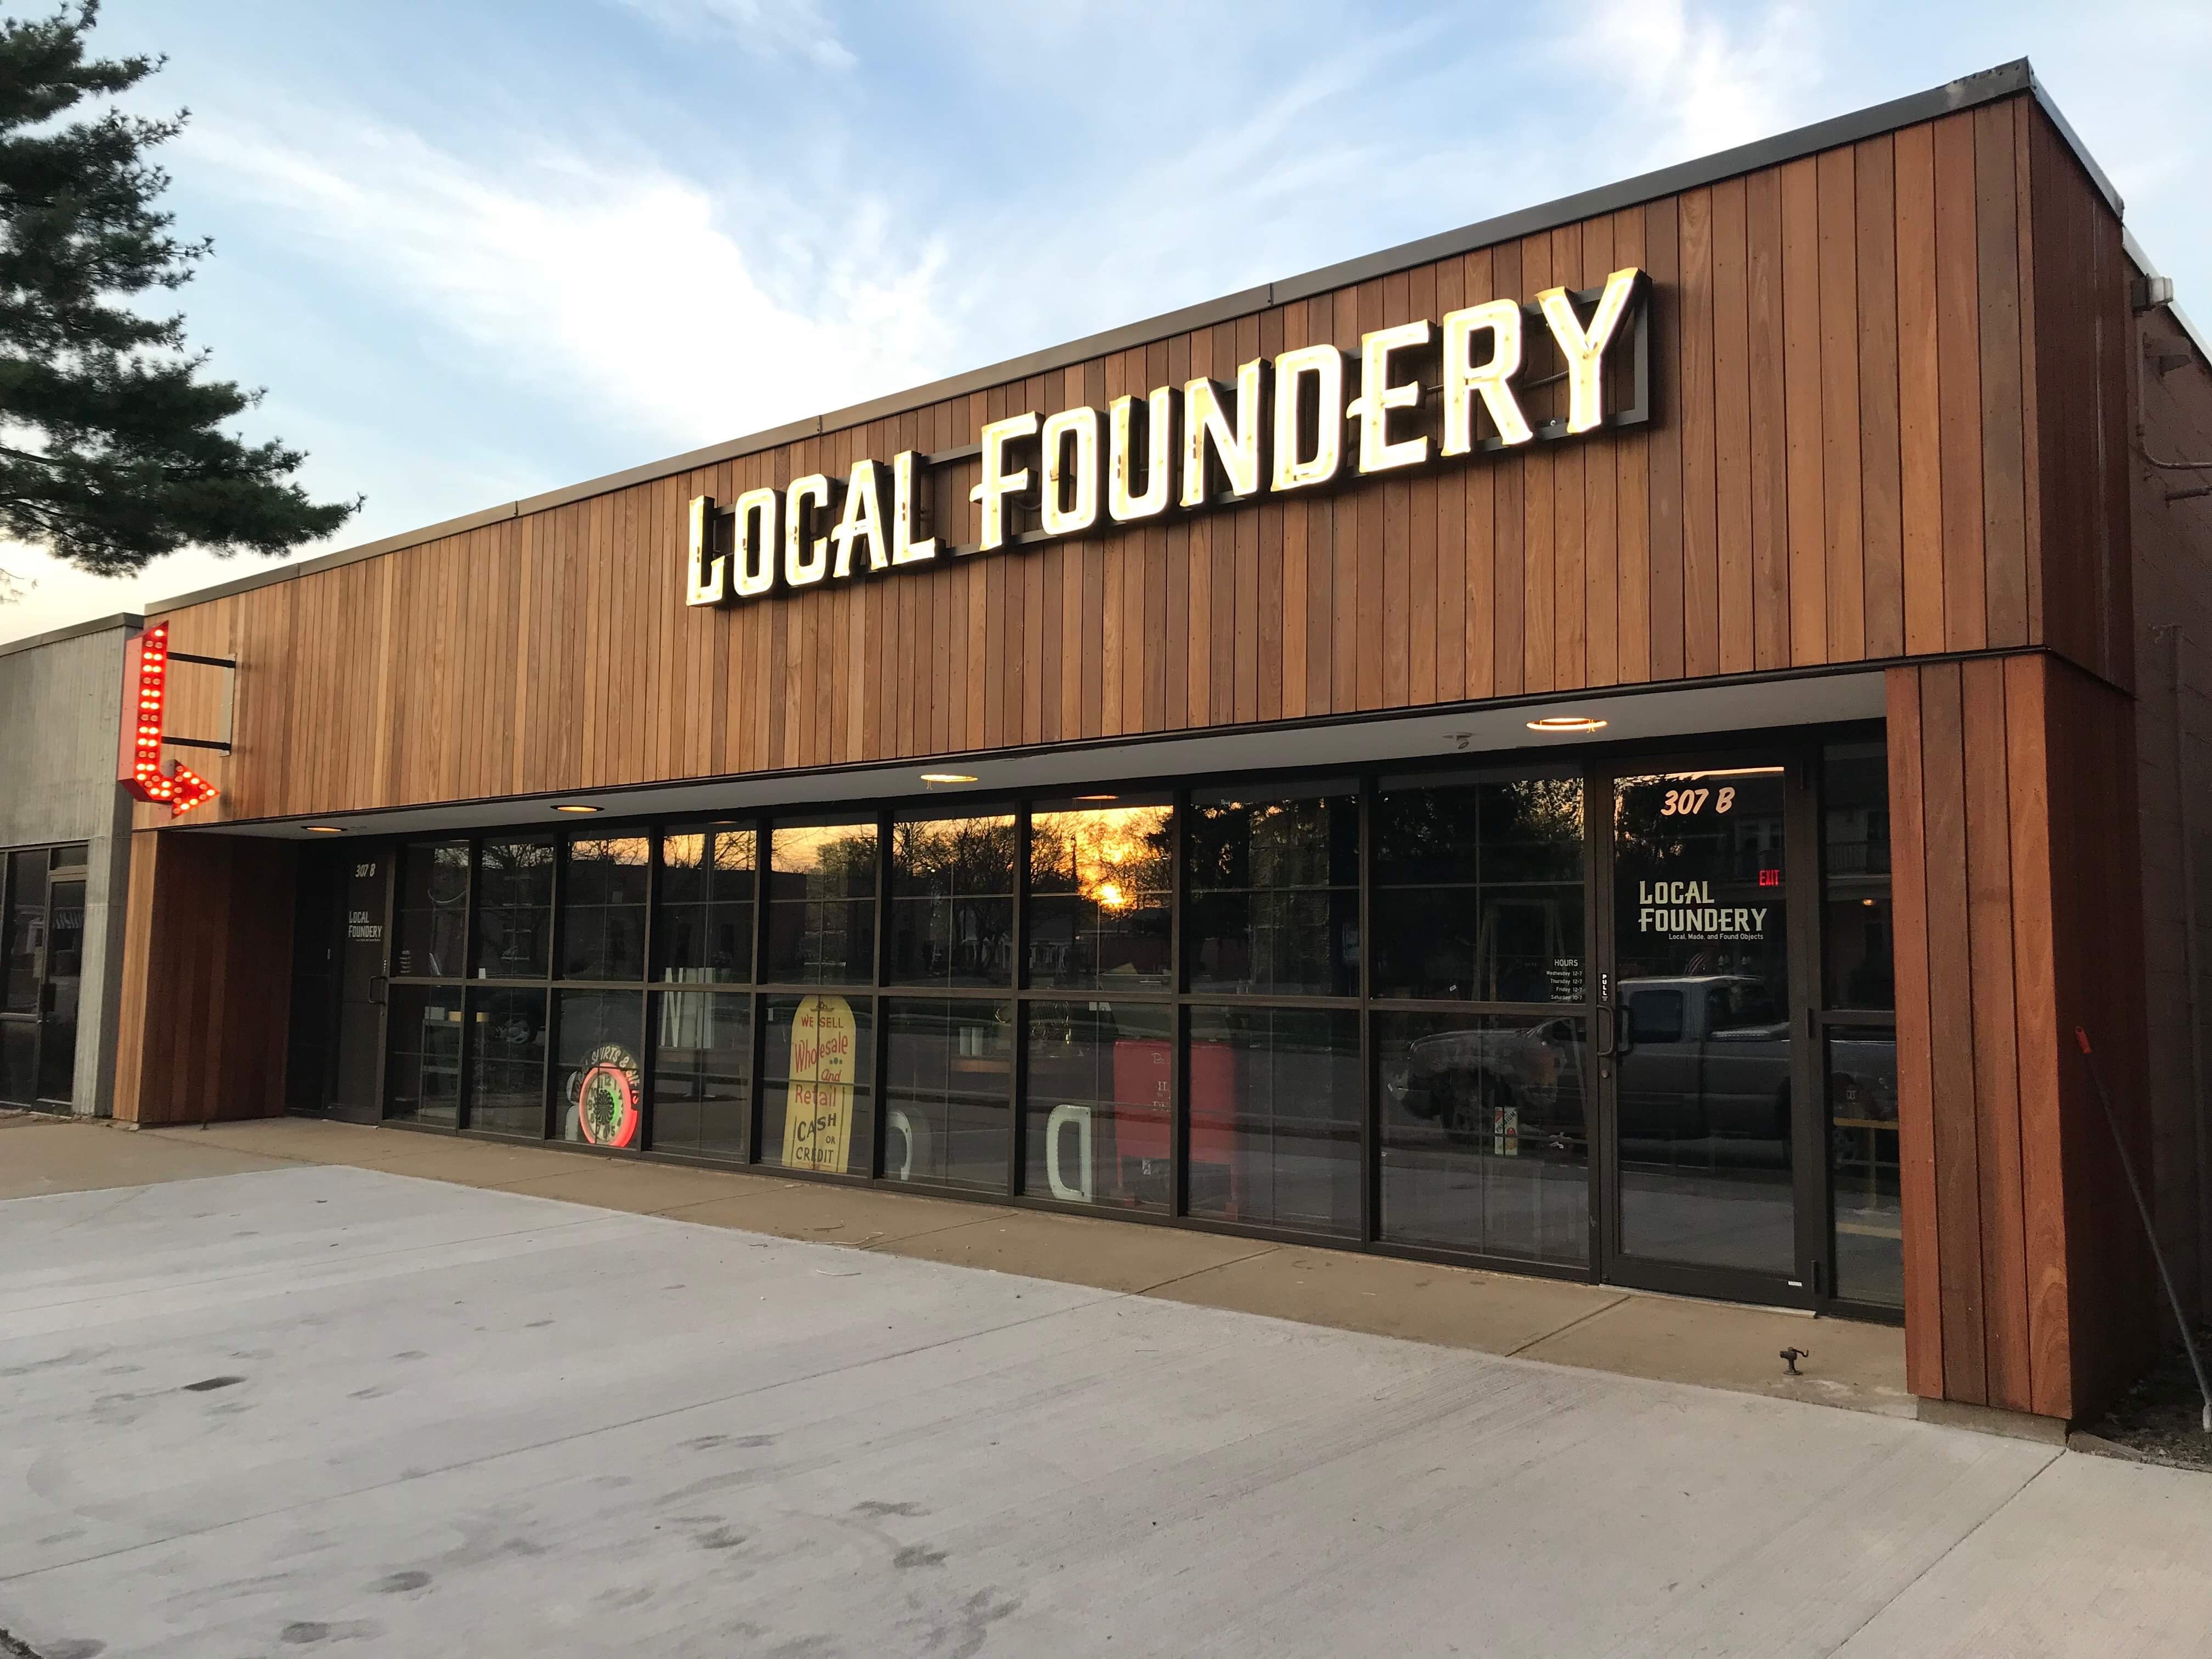 Completed storefront for 307 SW Market- Local Foundery. 